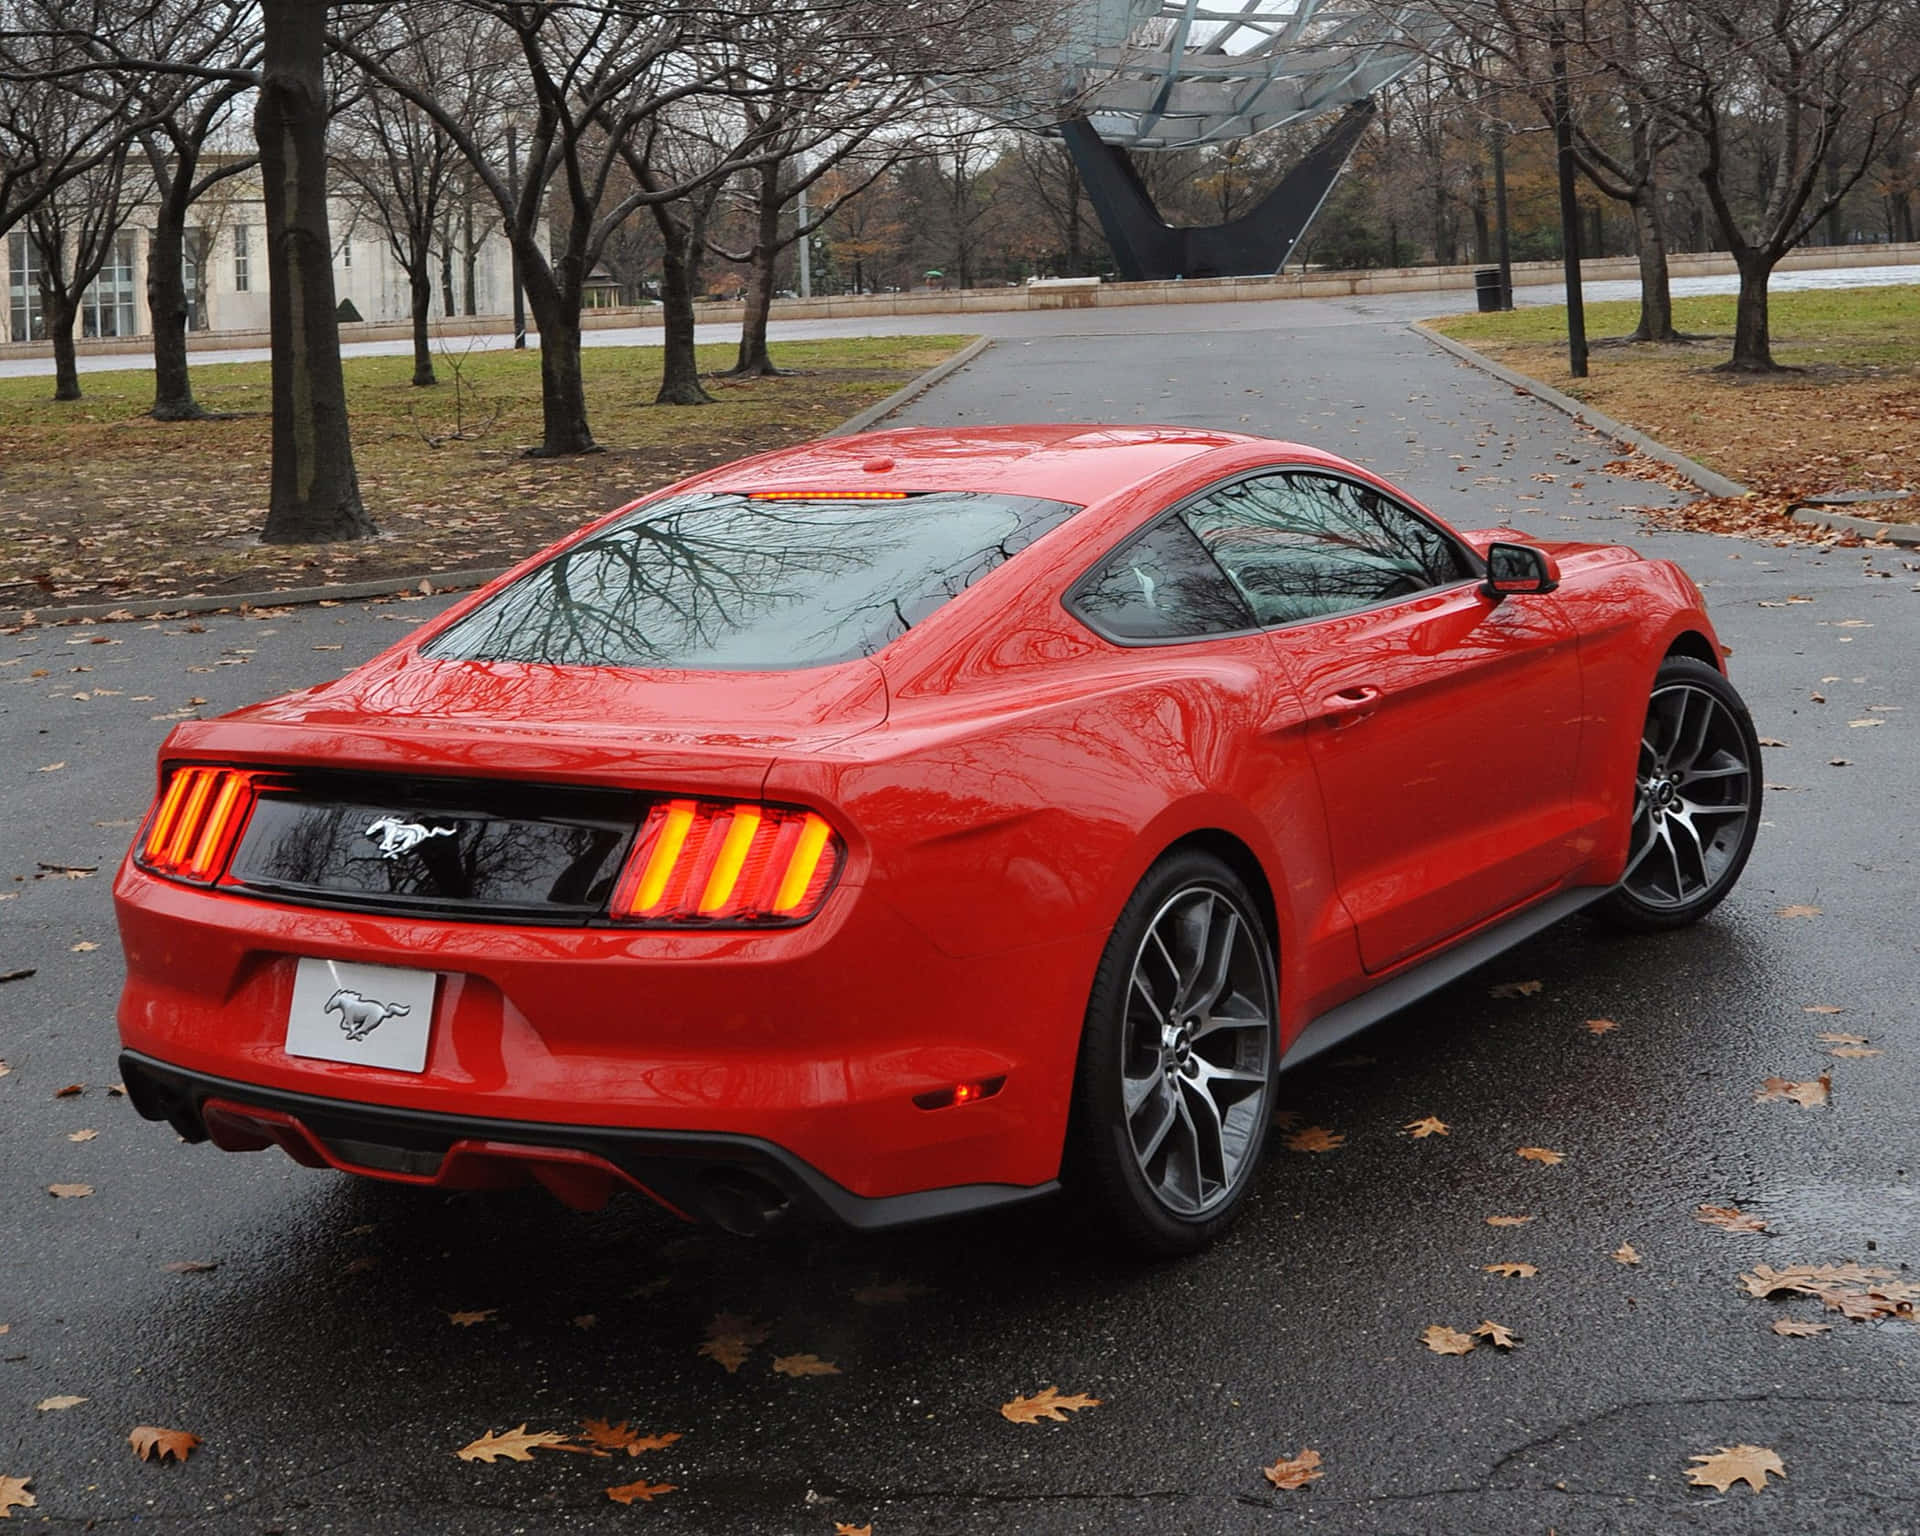 Sleek Ford Mustang EcoBoost on the Open Road Wallpaper